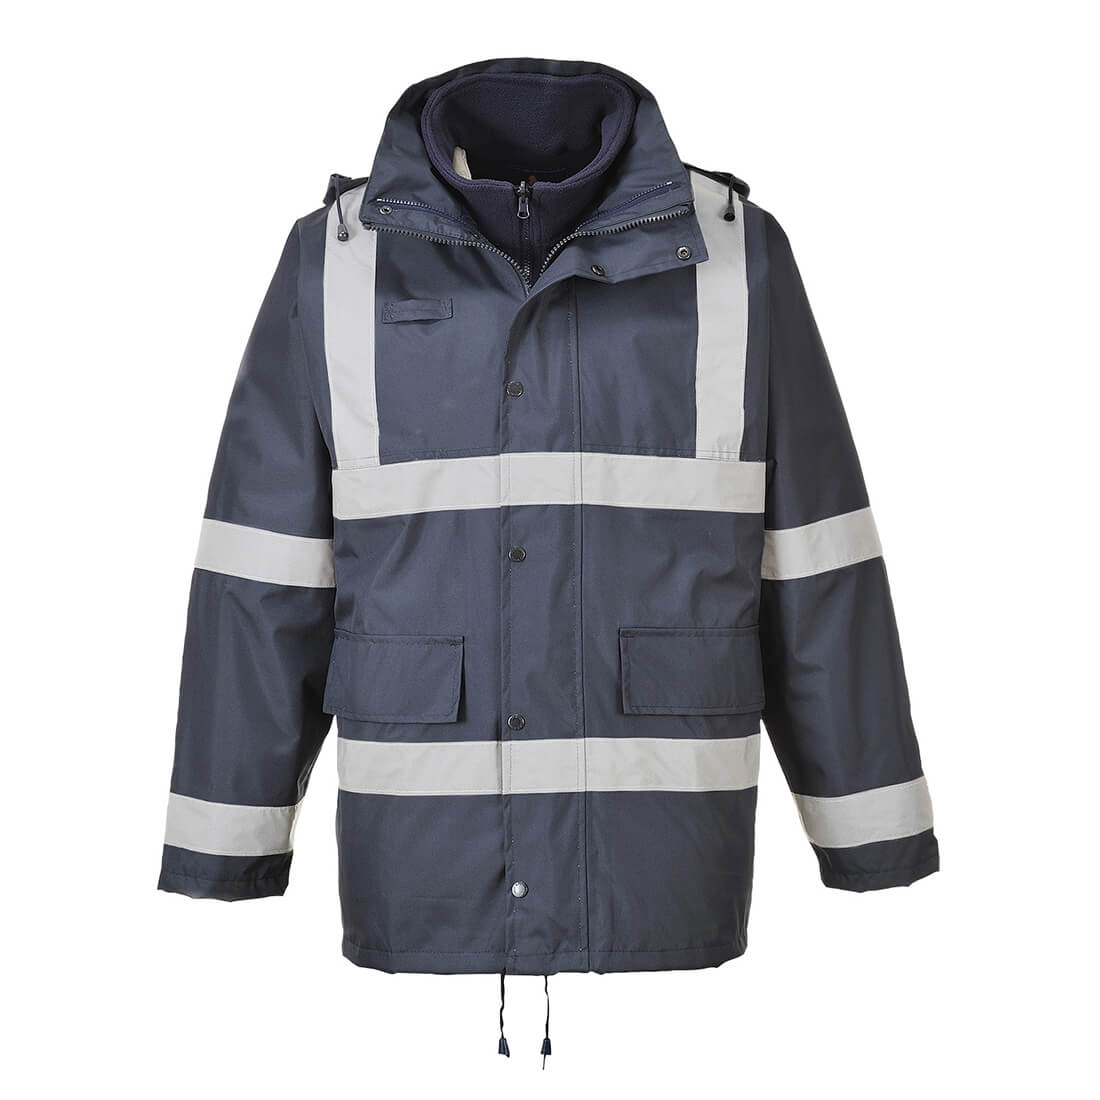 Photo of Portwest S431 Iona 3in1 Traffic Jacket Navy M